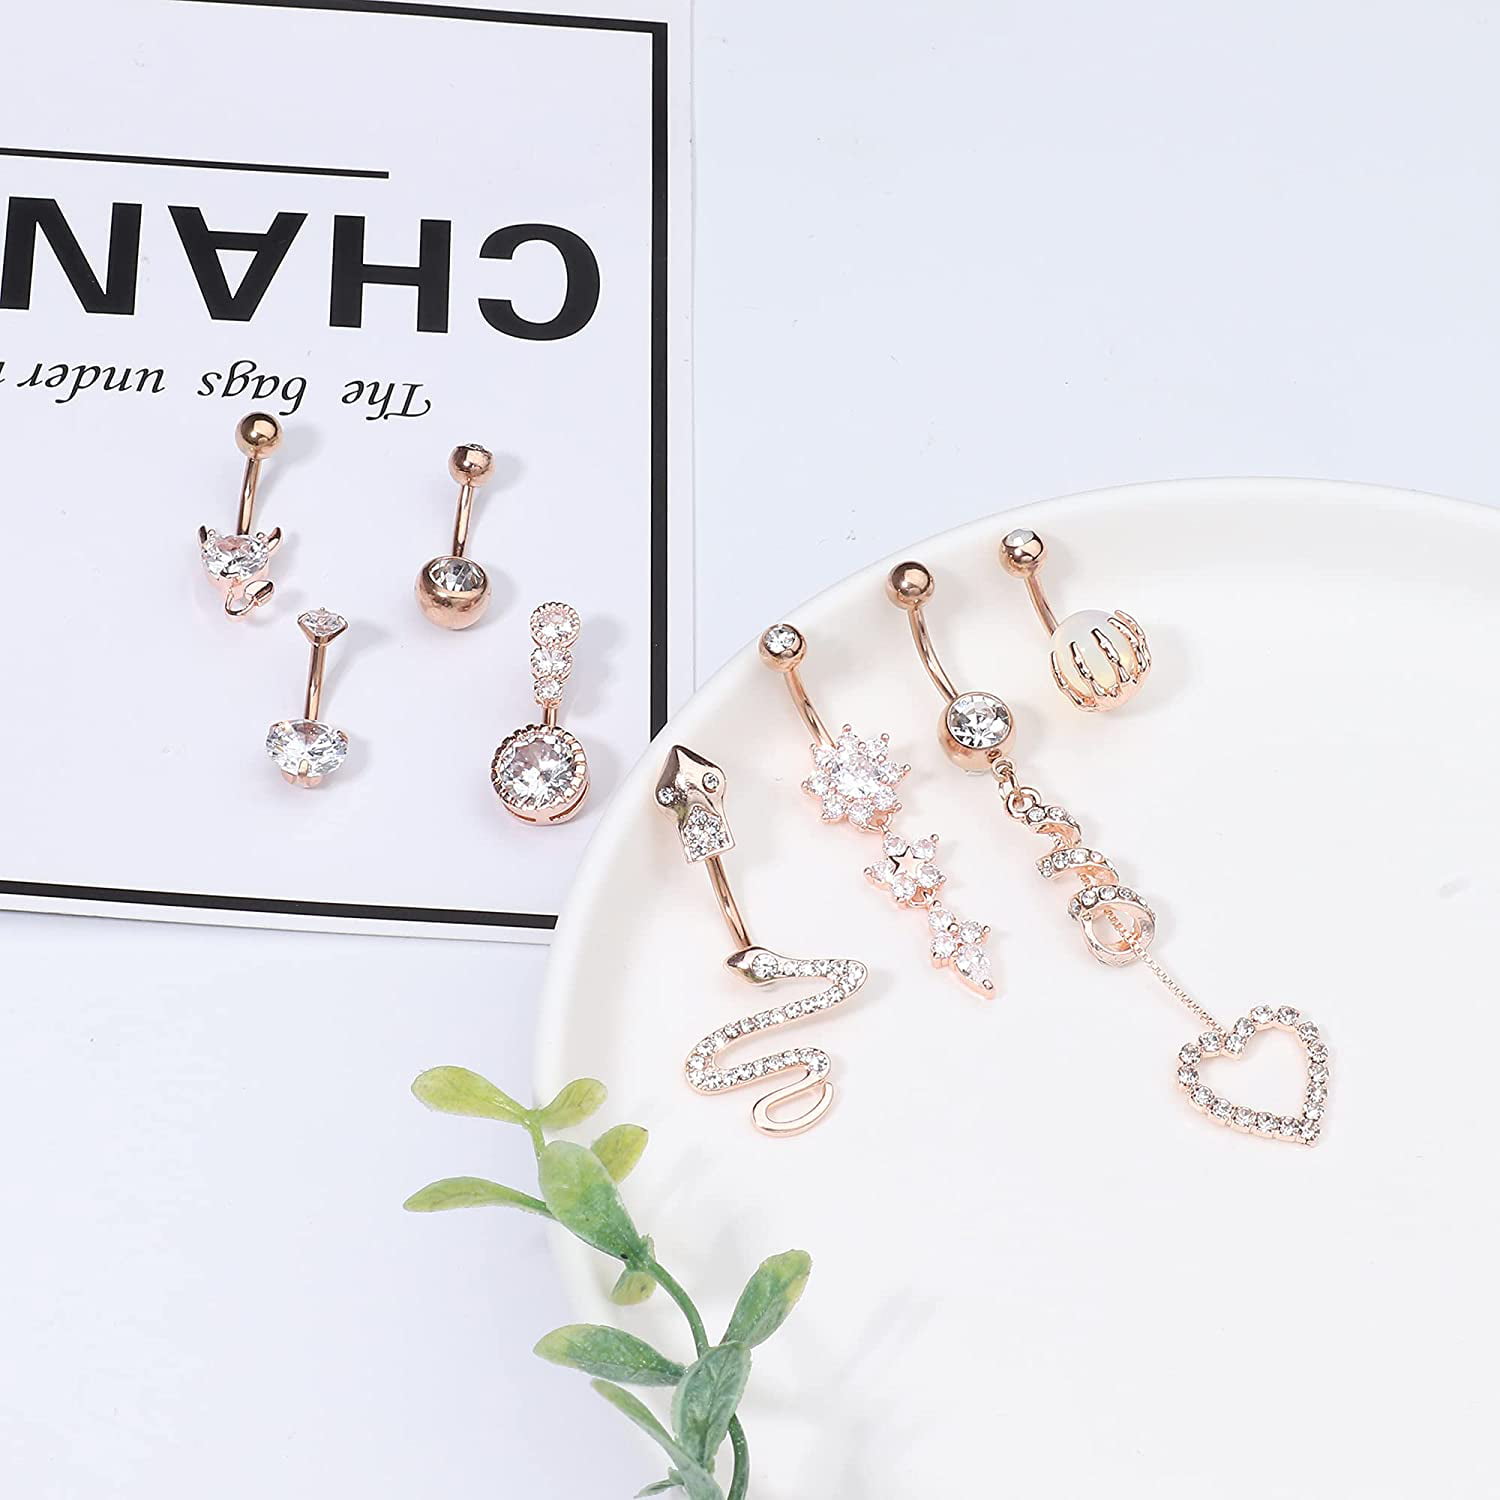 EVELICAL 8Pcs 14G Stainless Steel Belly Button Rings for Women Girls Round CZ Opal Acrylic Snake Dangle Screw Navel Bars Body Piercing Jewelry